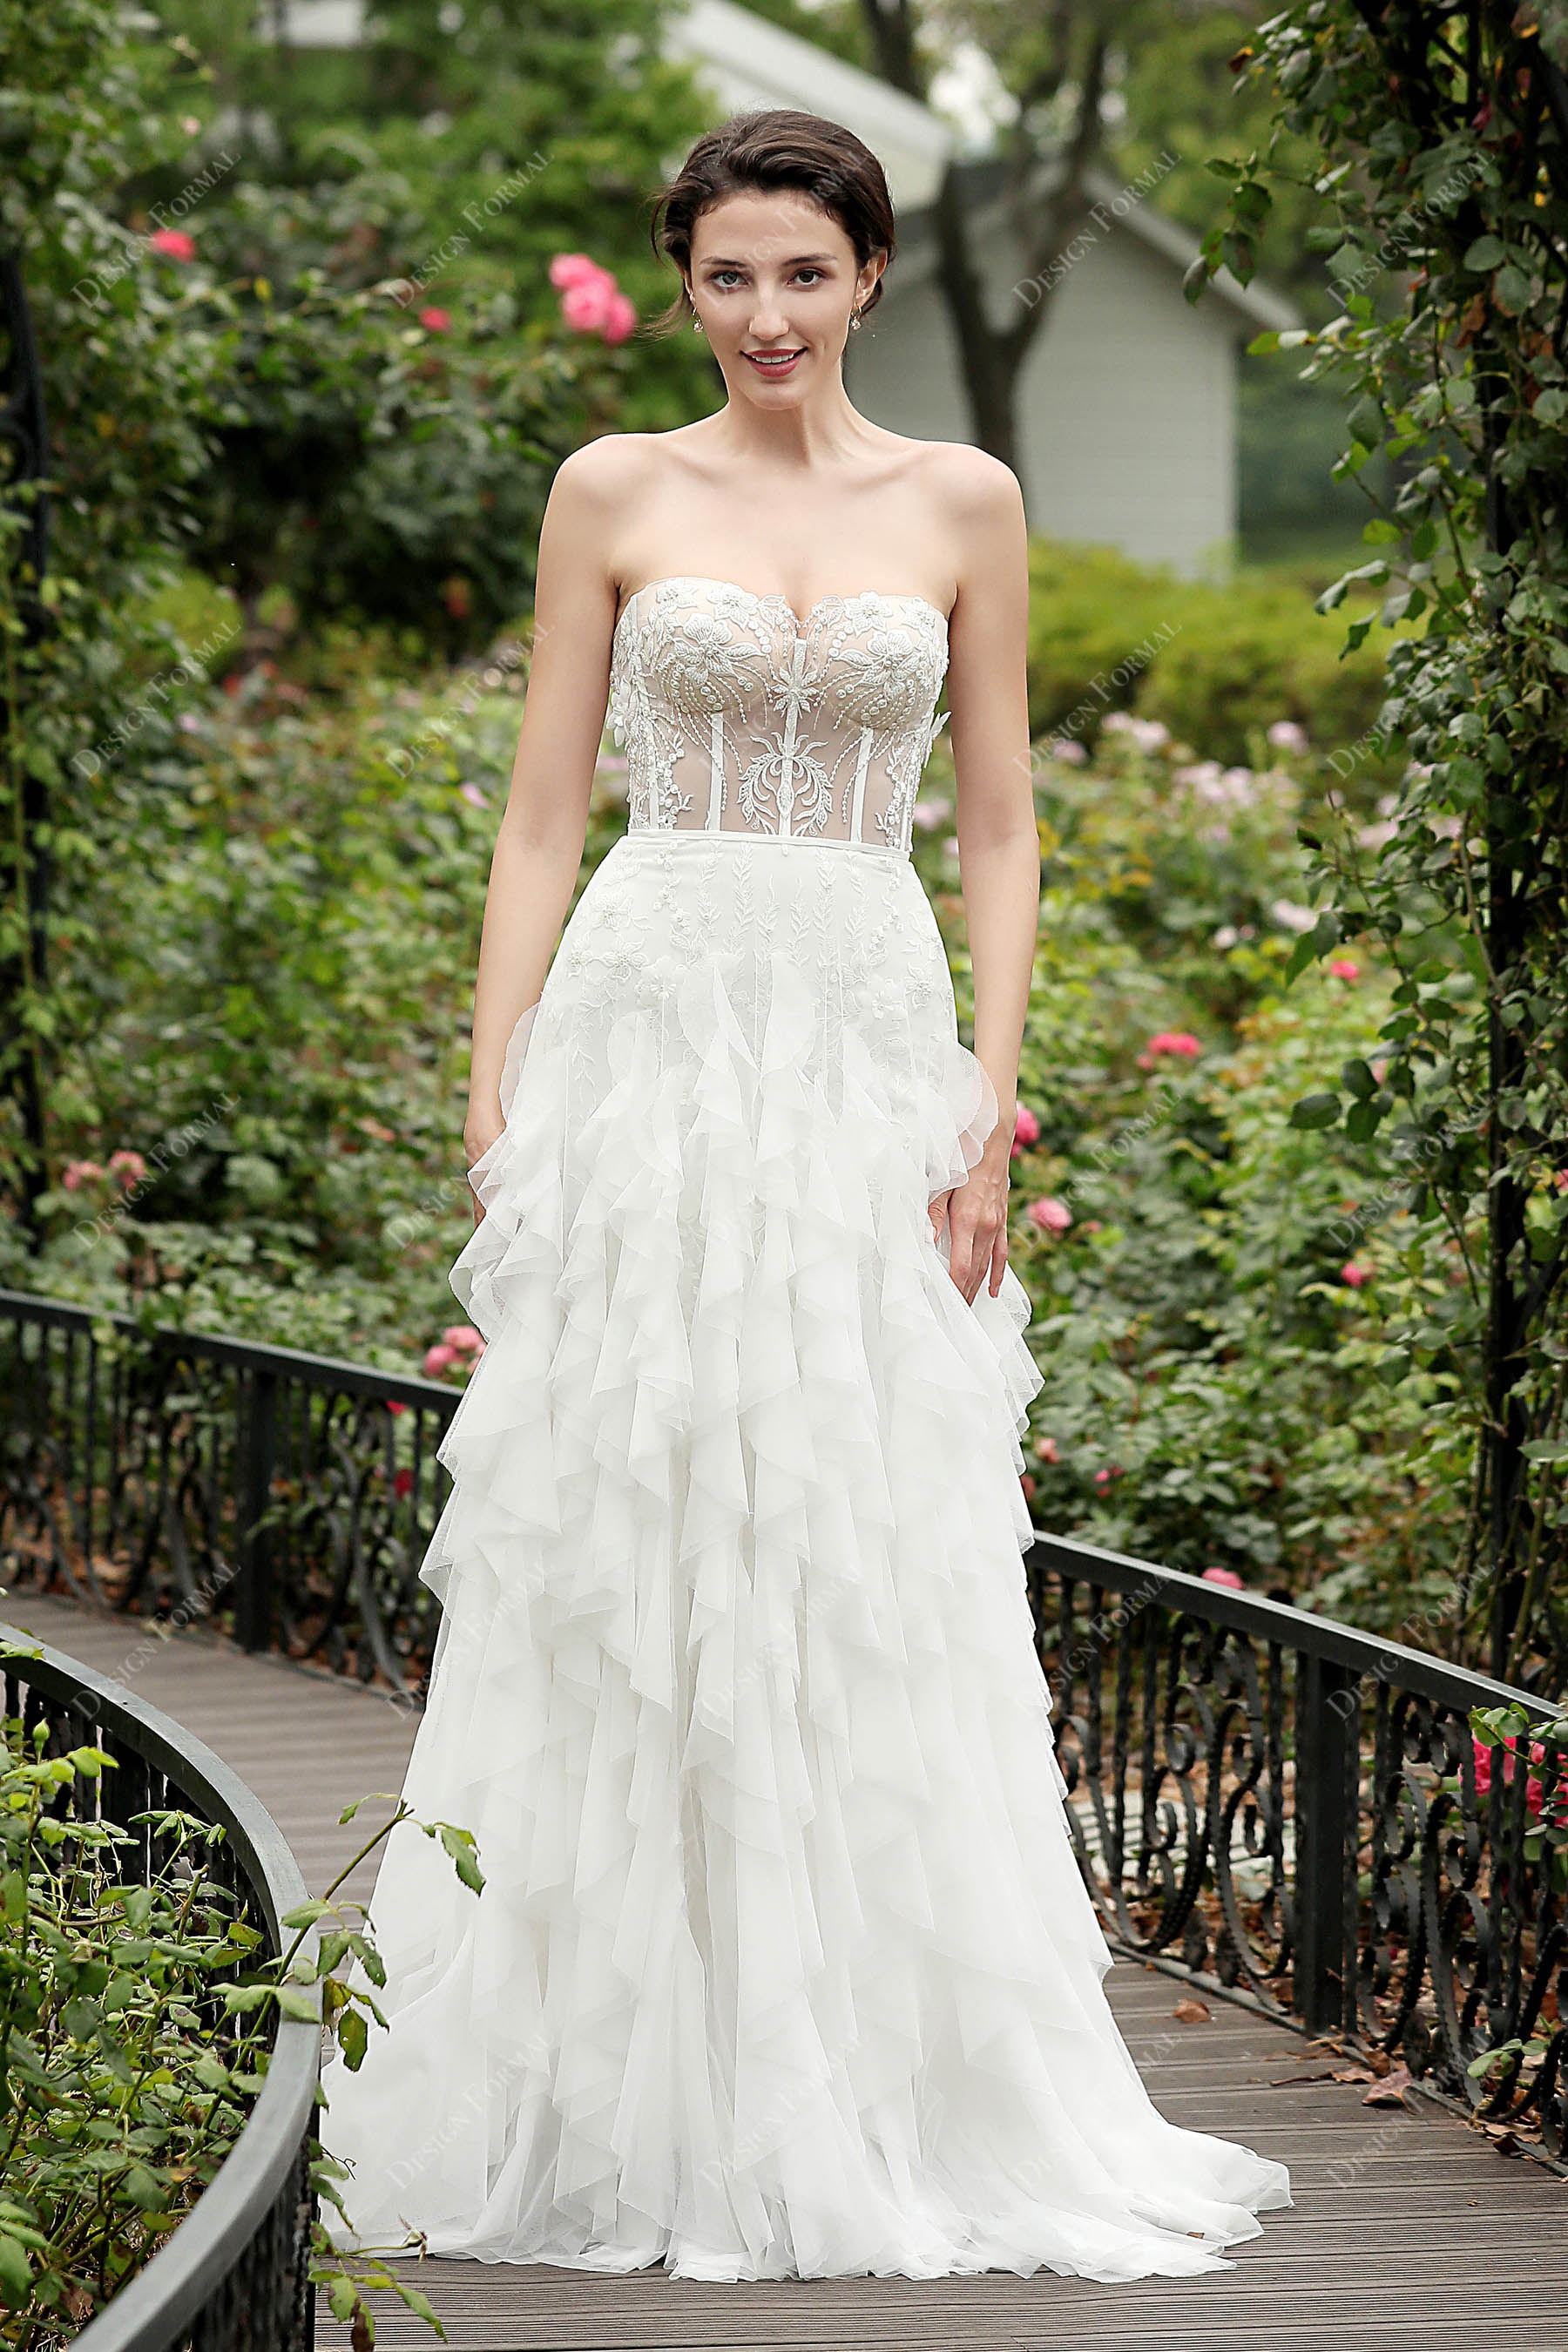 Lace Strapless Sweetheart Wedding Dress with Satin Overskirt